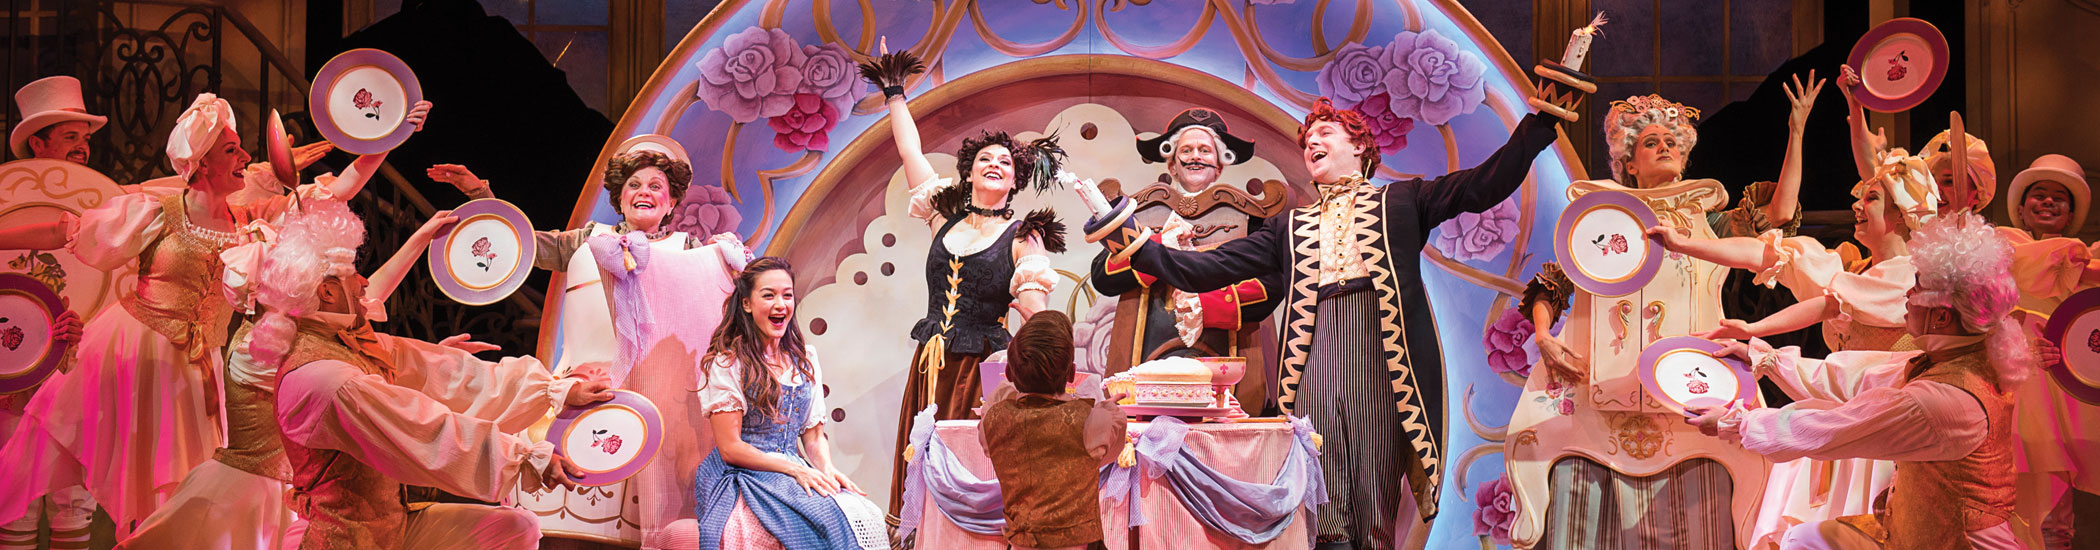 Photo of a smiling Belle sitting onstage surrounded by Lumière, Cogsworth, Mrs. Potts, Featherduster, and Wardrobe. 